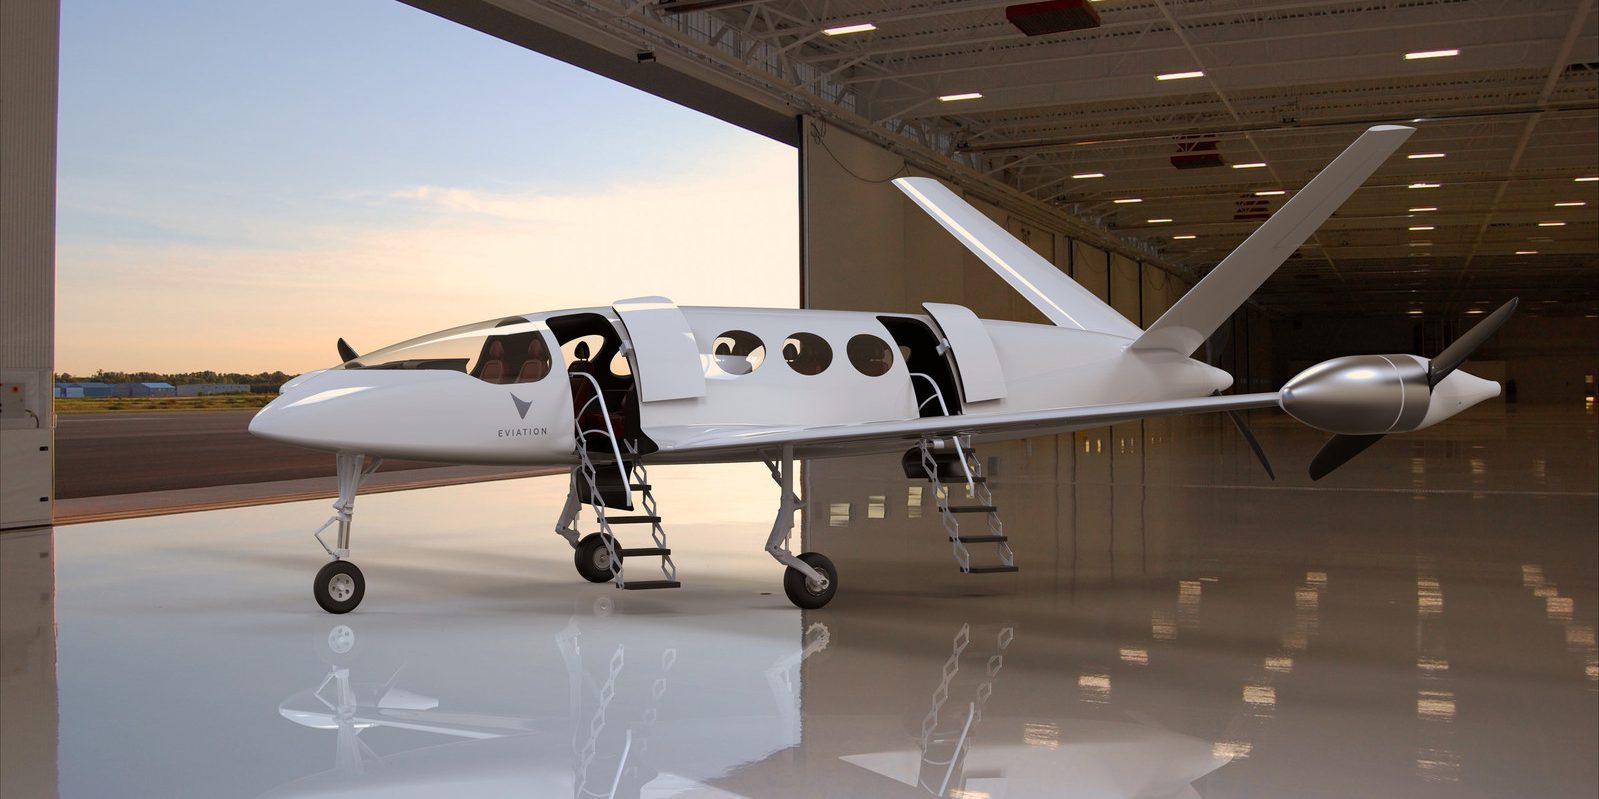 Tesla battery researchers point to enabling electric aircraft with next